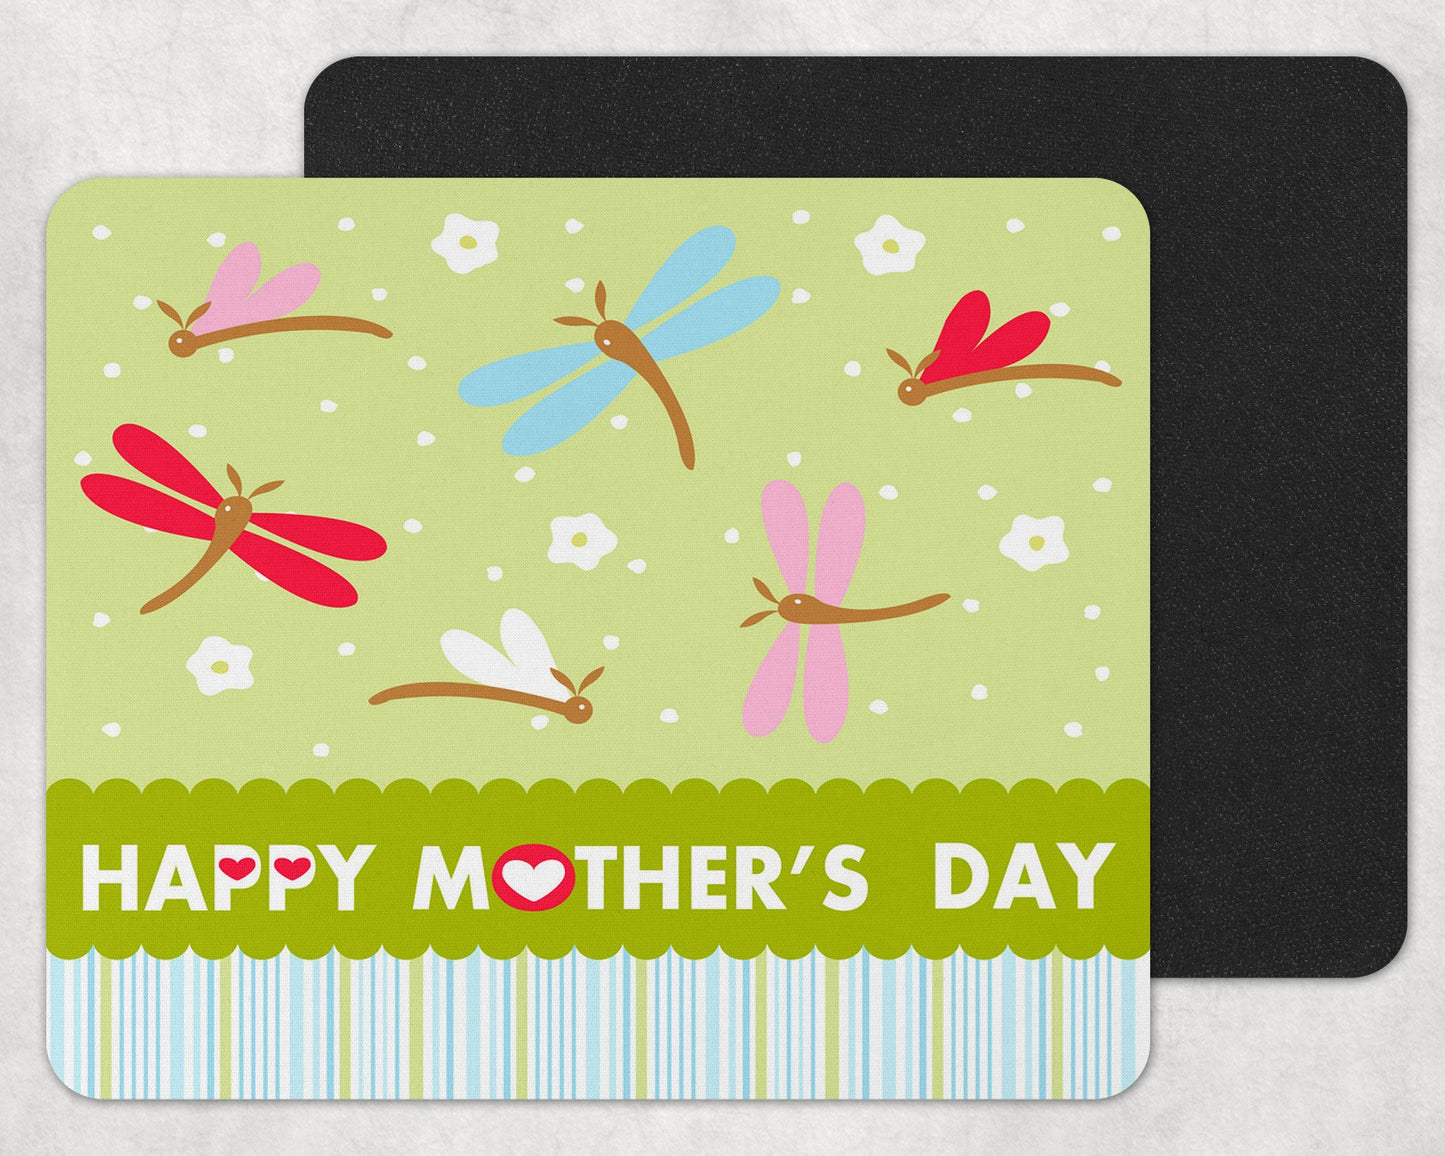 Happy Mothers Day Mousepad